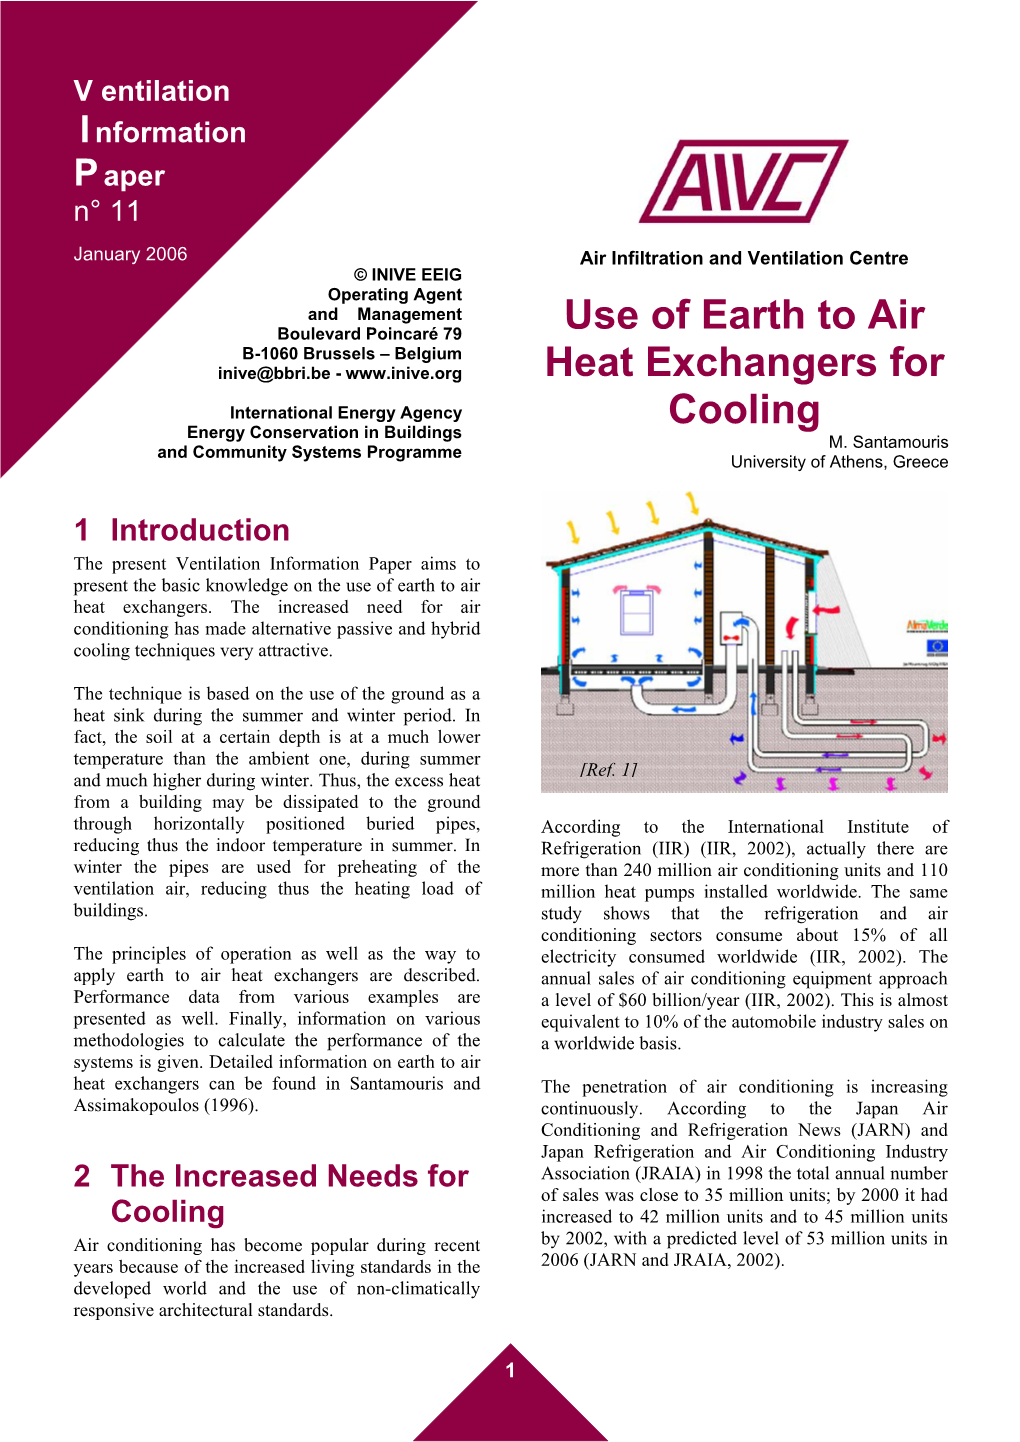 Use of Earth to Air Heat Exchangers for Cooling